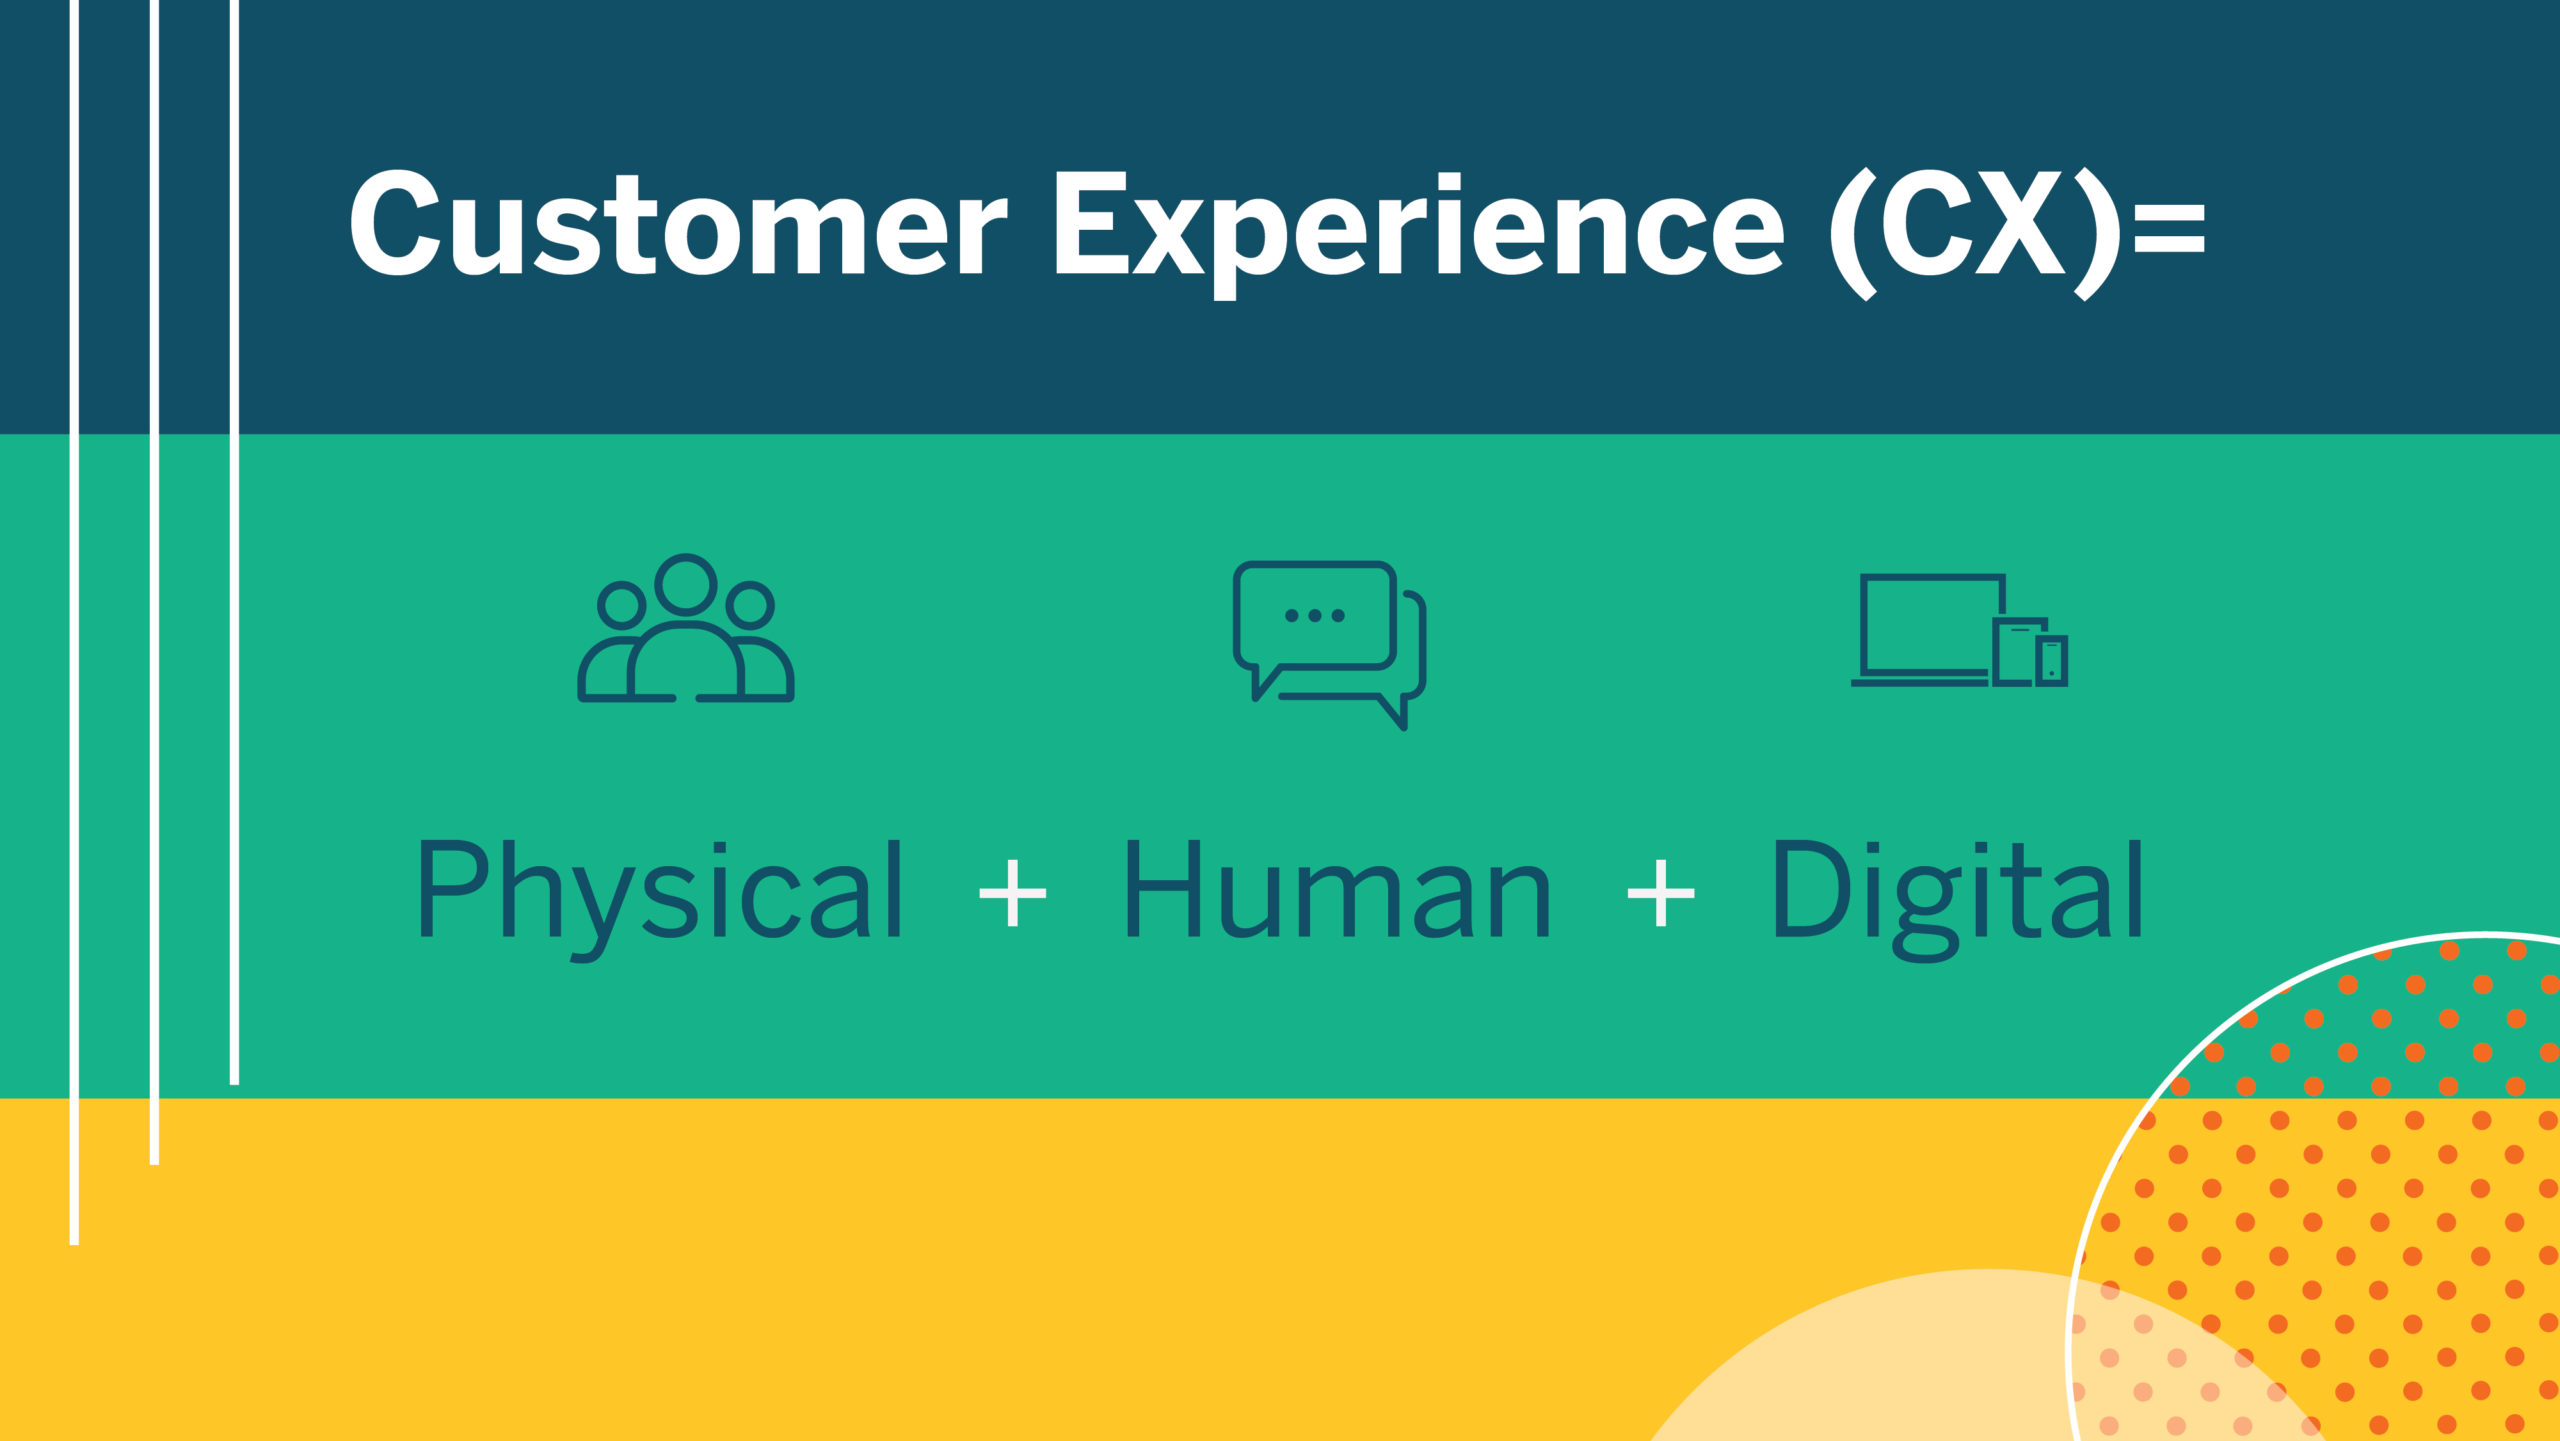 Customer Experience (CX) equals physical plus human plus digital